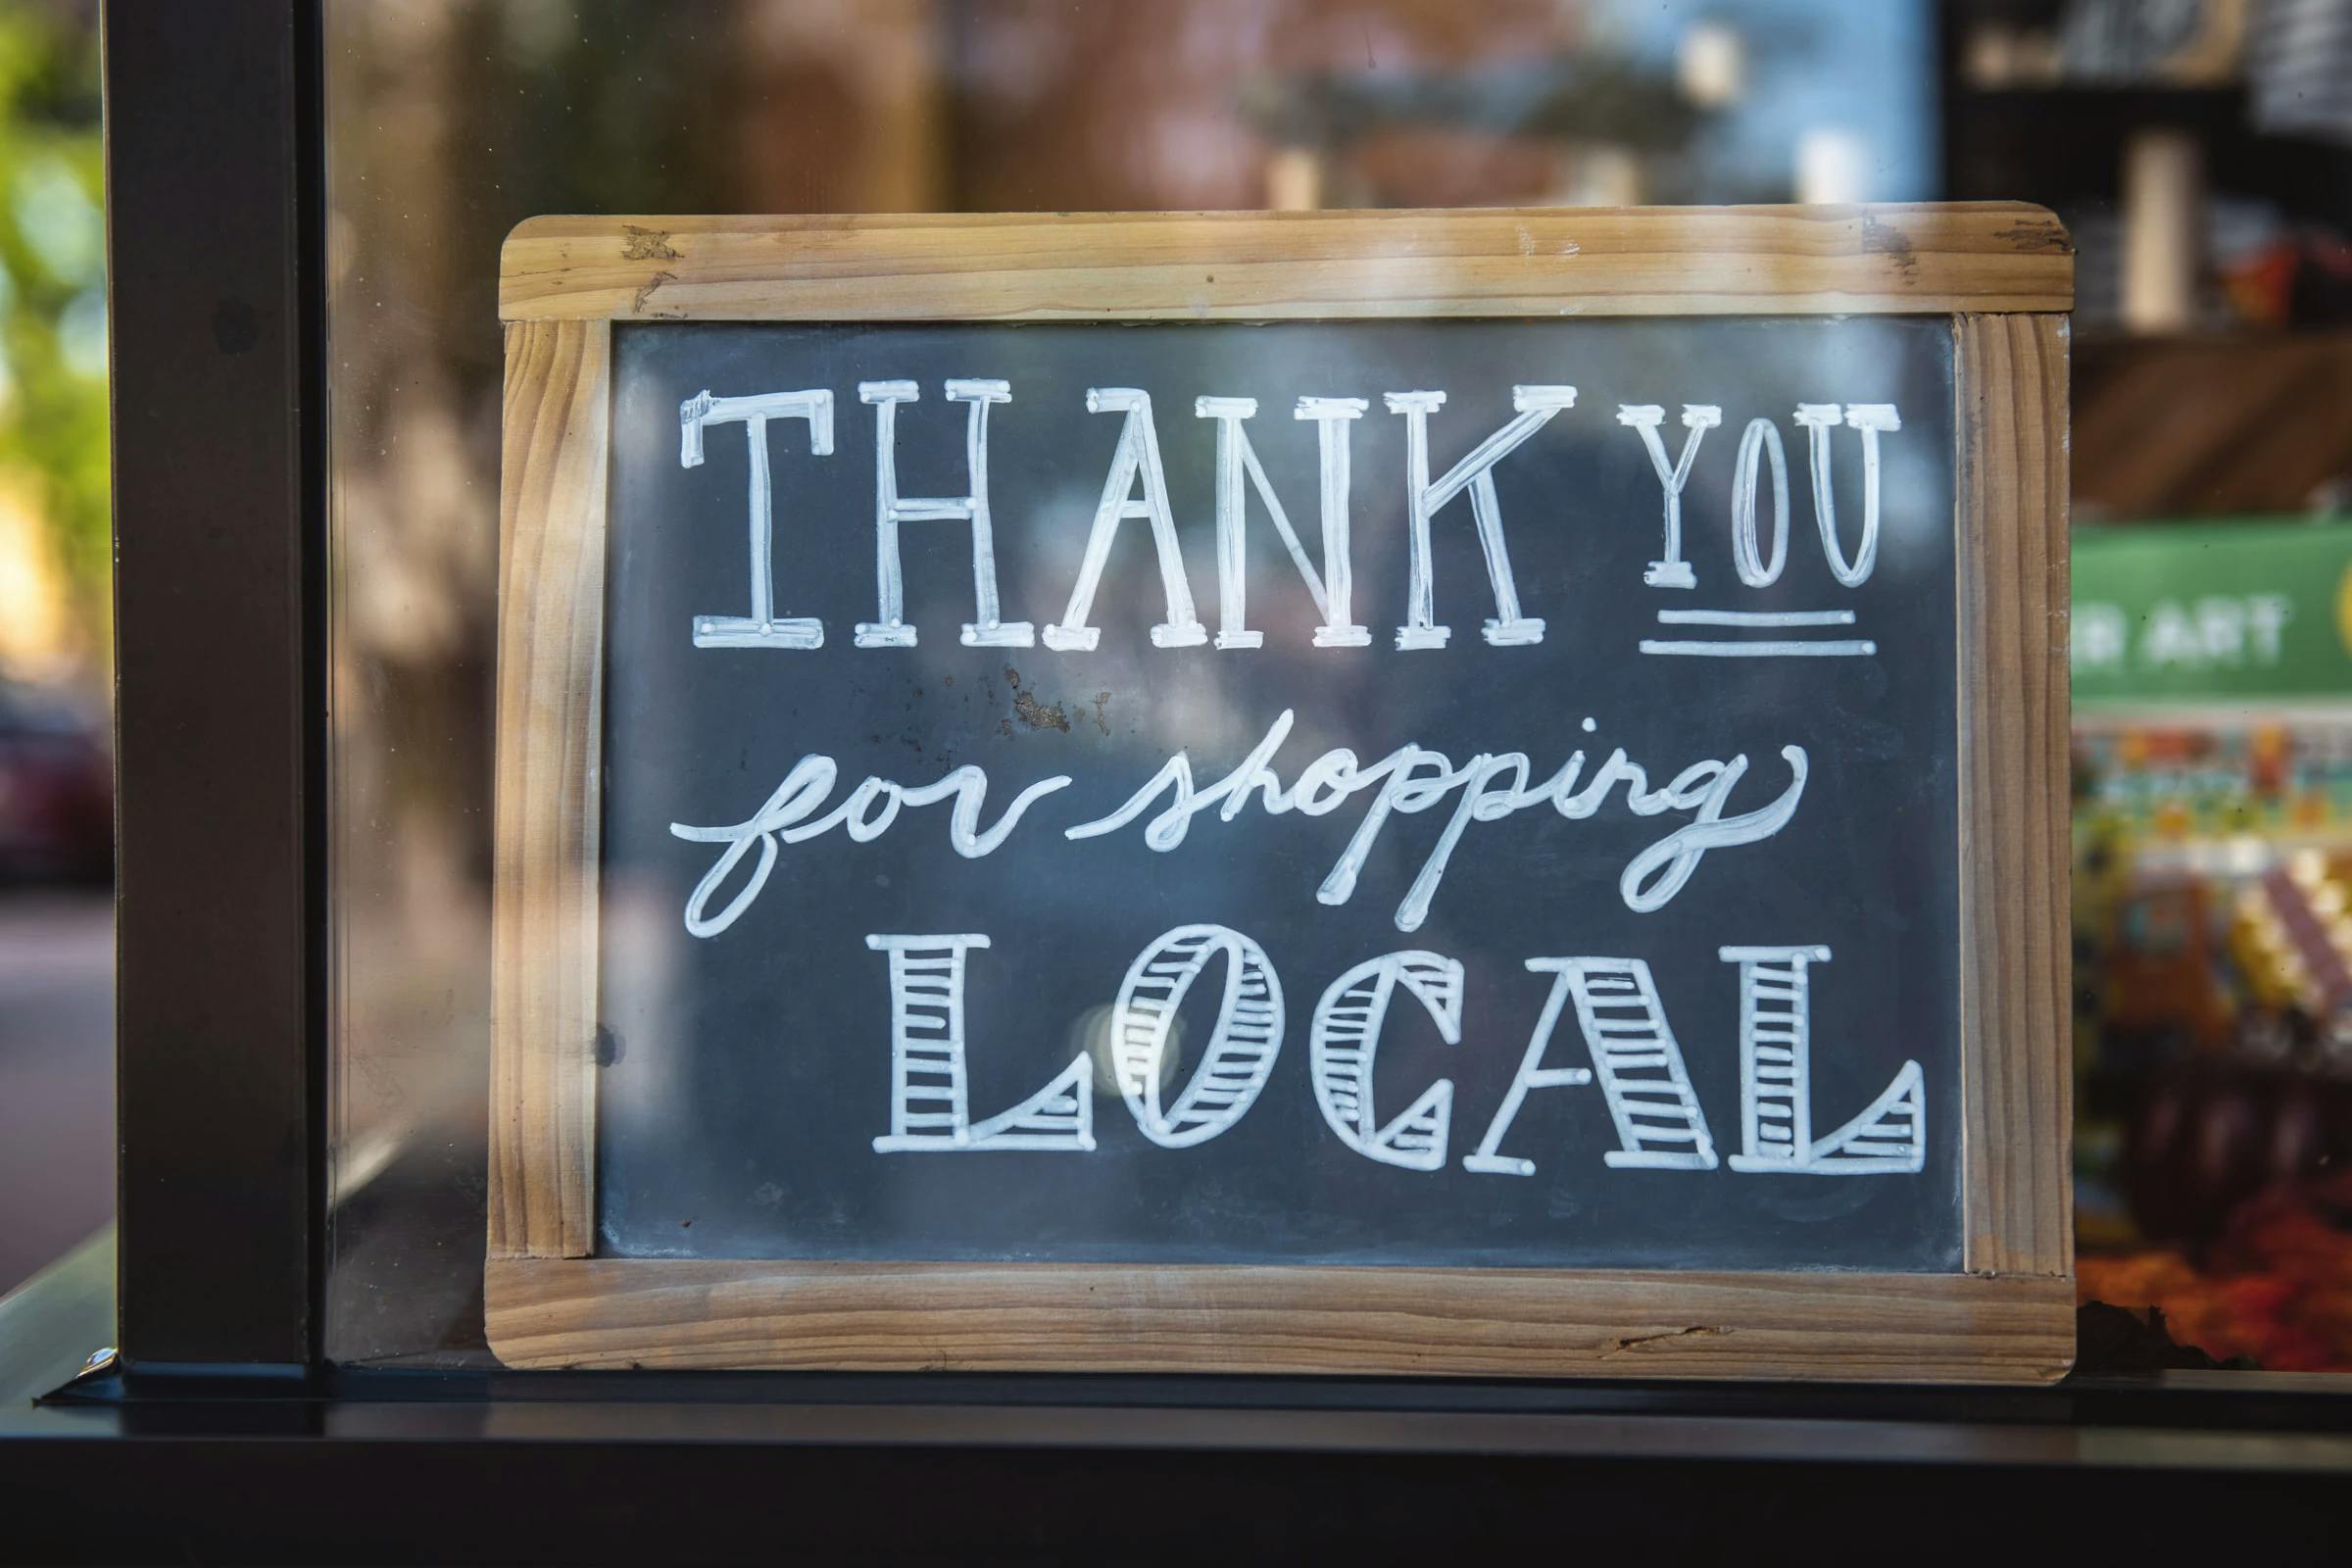 A sign in a shop window that reads "Thank you for shopping local"